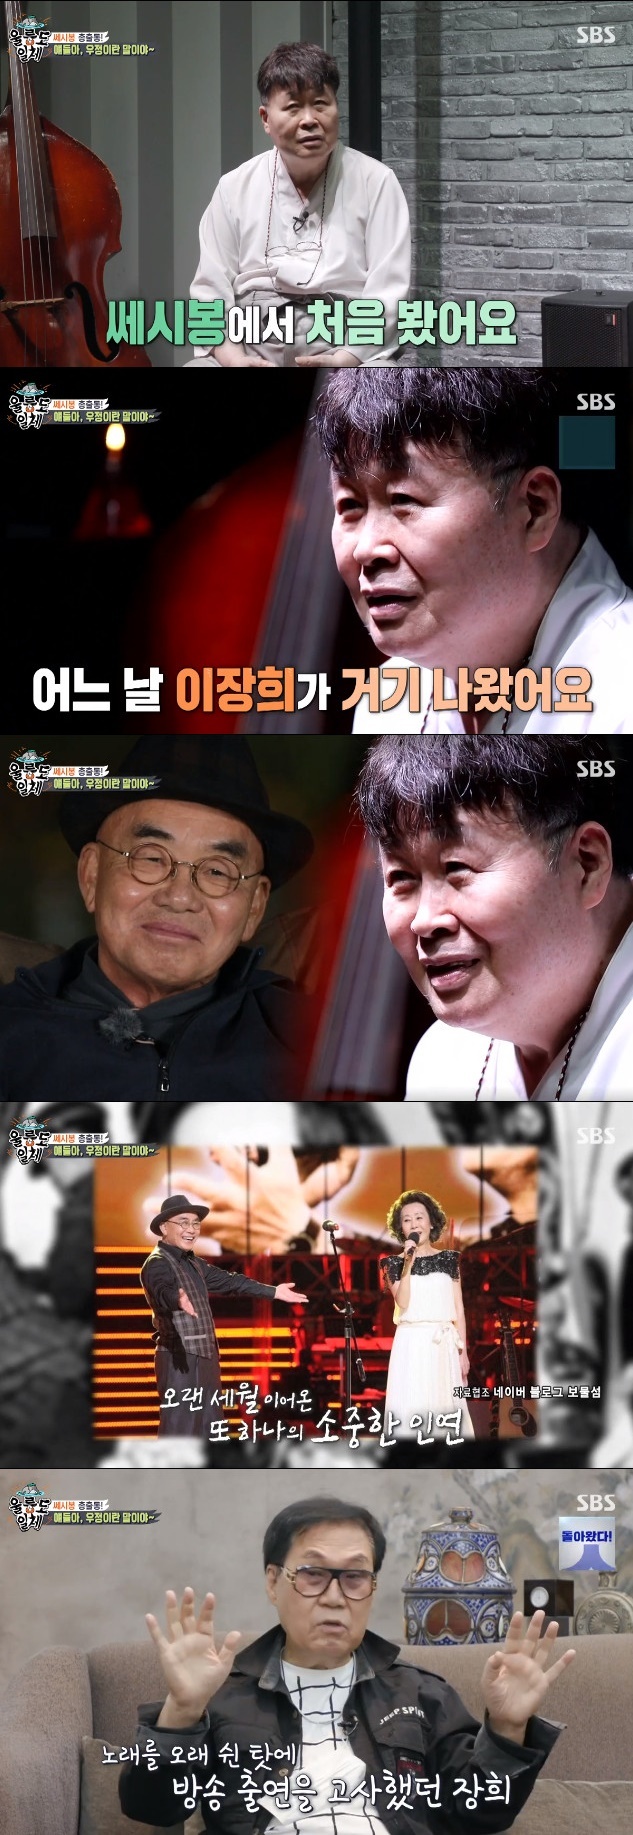 Seoul = = Yi Jang-hui mentioned Youn Yuh-jung.SBS All The Butlers, which was broadcast on the 20th, was the last trip of five members who left for Ulleungdo and met Master Yi Jang-hui.On this day, Yi Jang-huis long-time friend Song Chang-sik made a surprise appearance in the video.They first met at the music appreciation room Cest si bon around the late 1960s.Song Chang-sik said, It was a reaction that Yi Jang-hui was singing in Cest si bon and it was not in recent years; people liked it so much.I was shocked that I could sing like that. Its a style that sings with a feeling.Since then, the awareness and breadth of the song has widened and it has escaped from musical stereotypes. Yi Jang-hui was surprised that Ive never heard him talk about it.Song Chang-sik said, My first composition, The rain outside the window, was written by Yi Jang-hui. When I was living in a senior house, Yi Jang-hui came and said, I will write a song because I will write a song.At the time, Cest si bon Friends went to play and that was Youn Yuh-jung birthday, and I first released the song as a birthday celebration.It was the first time I sang the song in front of others. Yi Jang-hui is also a longtime friend with Youn Yuh-jung.Asked about the recent Academy recital of Youn Yuh-jung, he said, I was also with United States of America at the time, and Youn Yuh-jung is an alumni of Elementary School with me. I met Kim Soo-hyun and five very often.Song Chang-sik said of Yi Jang-hui: Im a free man, Im not tied up anywhere.I went to United States of America while I was in music, and I went to a cafe and came to Ulleungdo and became the king of Ulleung Heaven. Then he asked Yi Jang-hui, You said you have a woman friend, Jang Hee. Yi Jang-hui replied, Pretty!Another Cest si bon member Cho Young-nam also sent a video letter.Im really old because its my 50th anniversary, he said.  (Yi Jang-hui) has found love beyond 70.He said of Yi Jang-hui, Its a friend that others cant have, you cant make such a friend anywhere.I do not have such a child as Friend. 